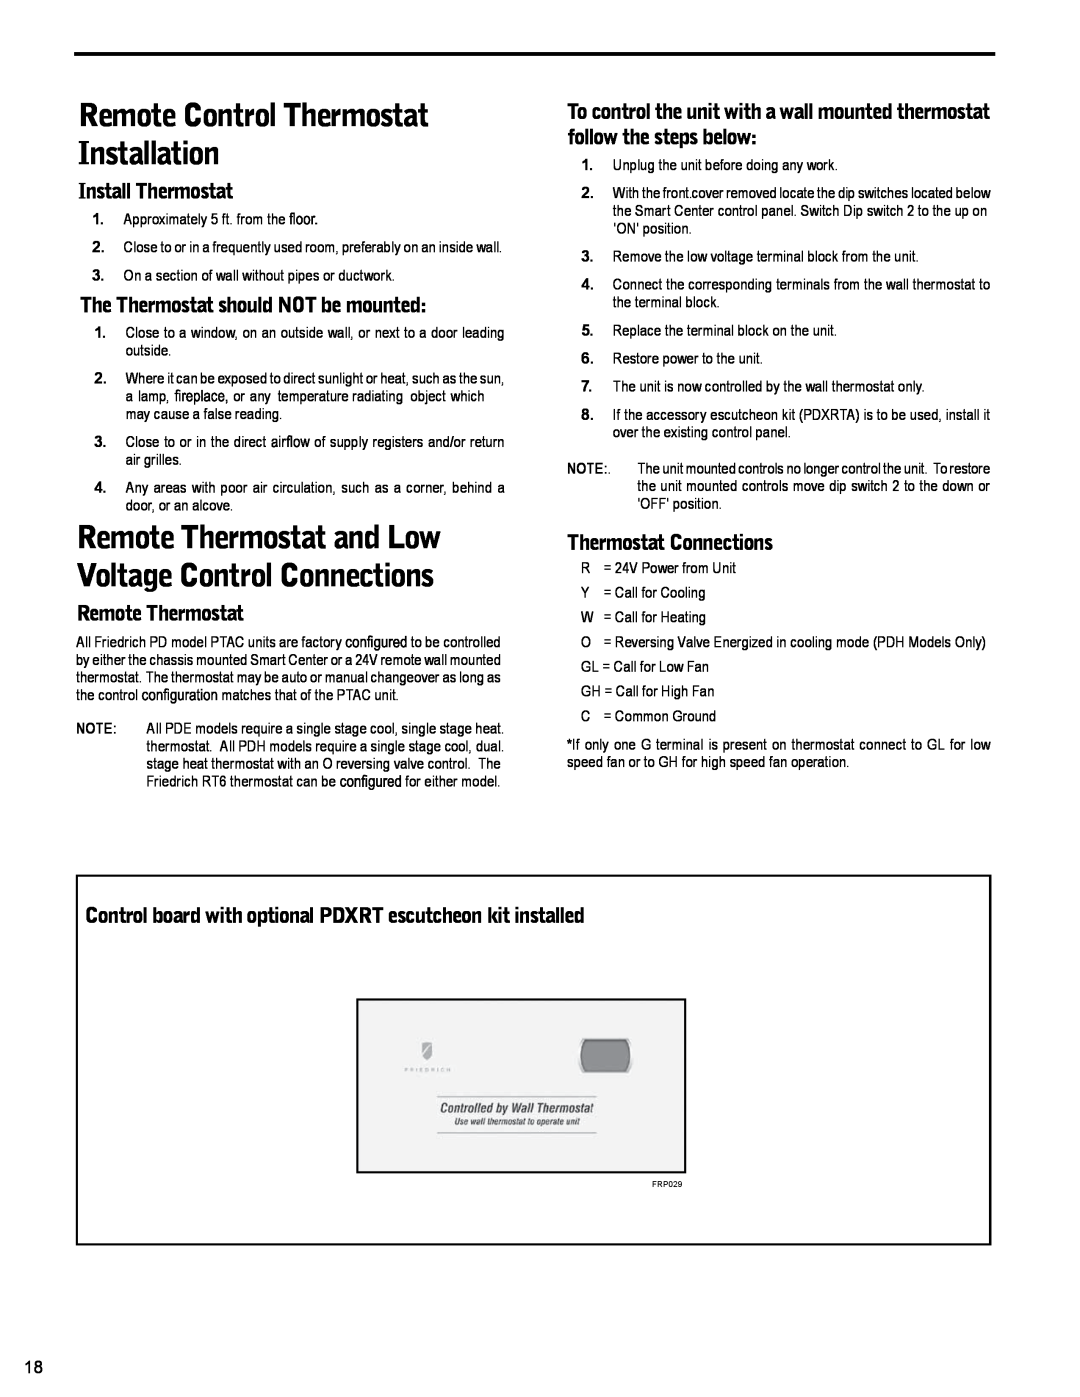 Friedrich PTAC - R410A Remote Control Thermostat Installation, Install Thermostat, The Thermostat should NOT be mounted 